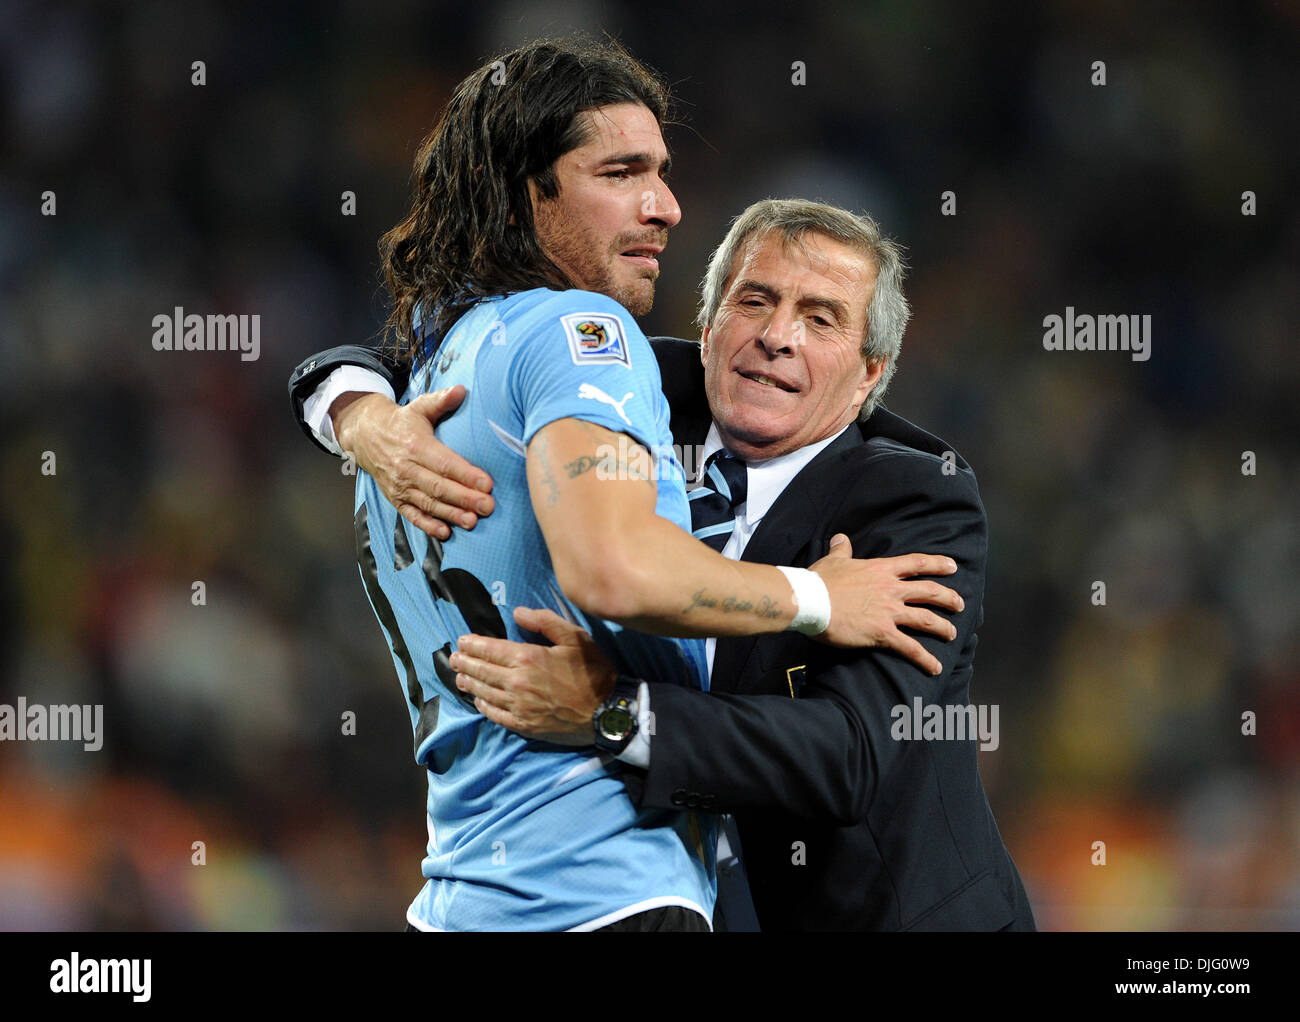 July 02, 2010 - Johannesburg, South Africa - Sebastian Abreu of Uruguay celebrates the victory with Oscar Tabarez, coach of Uruguay during the 2010 FIFA World Cup Quarter Final soccer match between Uruguay and Ghana at Soccer City Stadium on June 02, 2010 in Johannesburg, South Africa. (Credit Image: © Luca Ghidoni/ZUMApress.com) Stock Photo